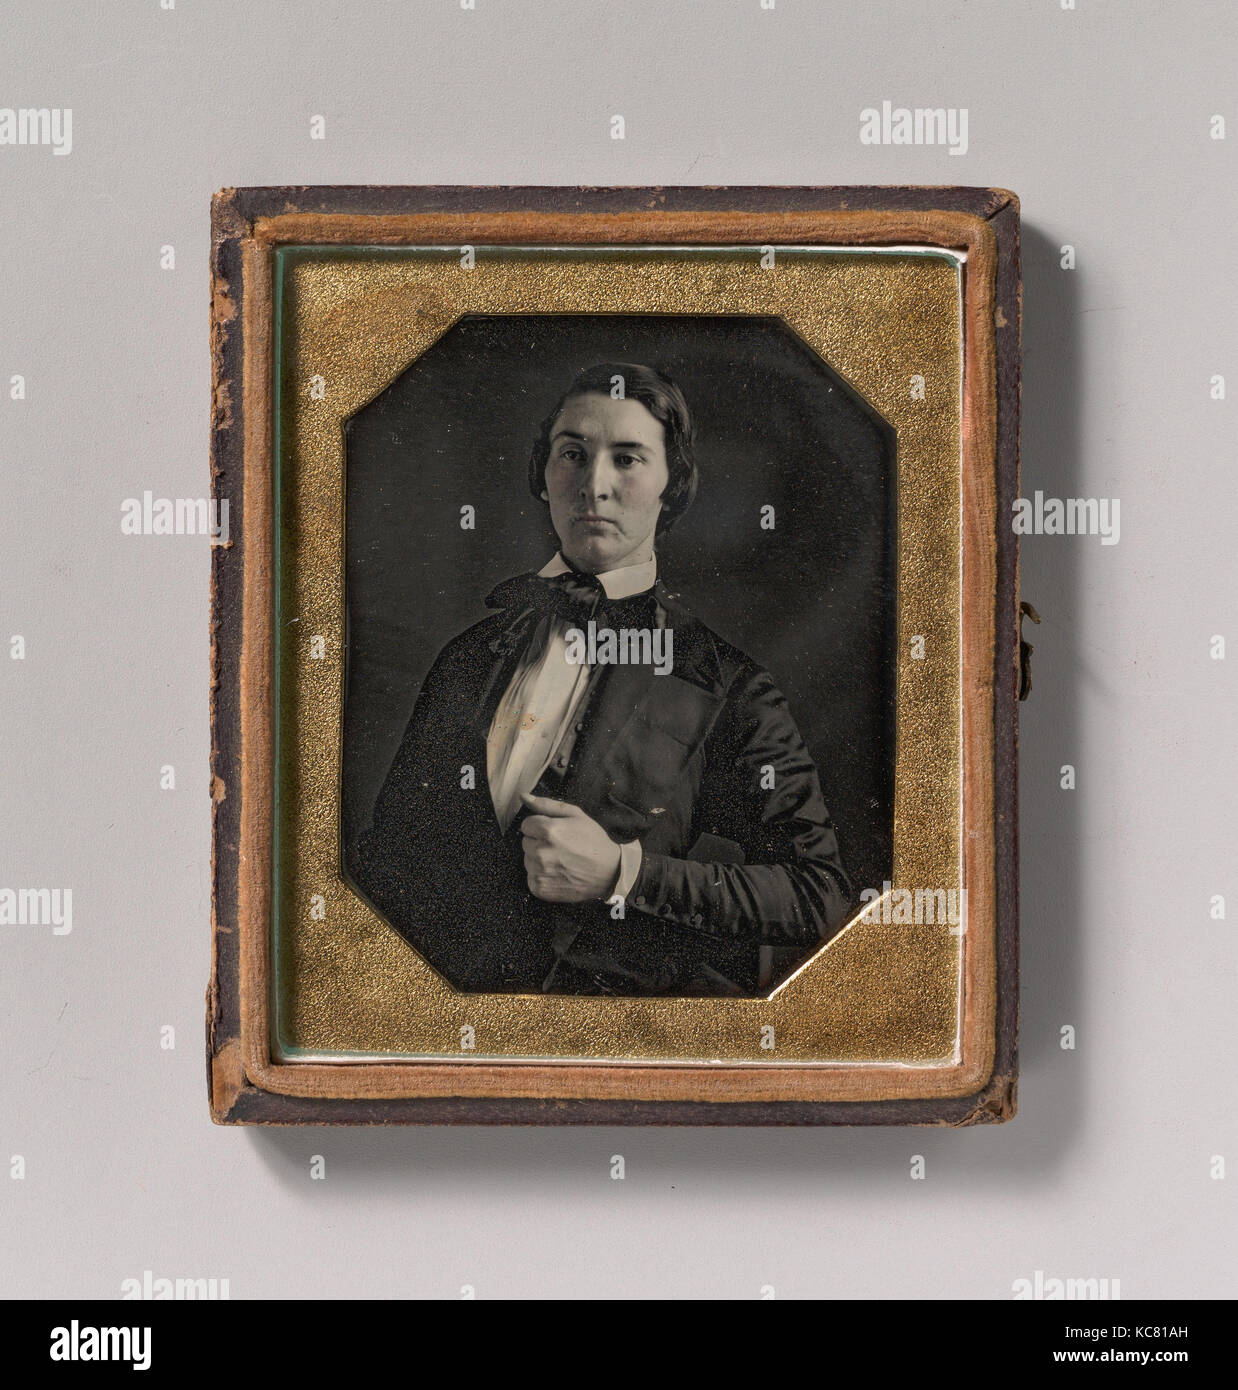 Young Man Holding Jacket Lapel, 1840s, Daguerreotype, Image: 6.7 x 5.5 cm (2 5/8 x 2 3/16 in.), Photographs, Unknown (American Stock Photo